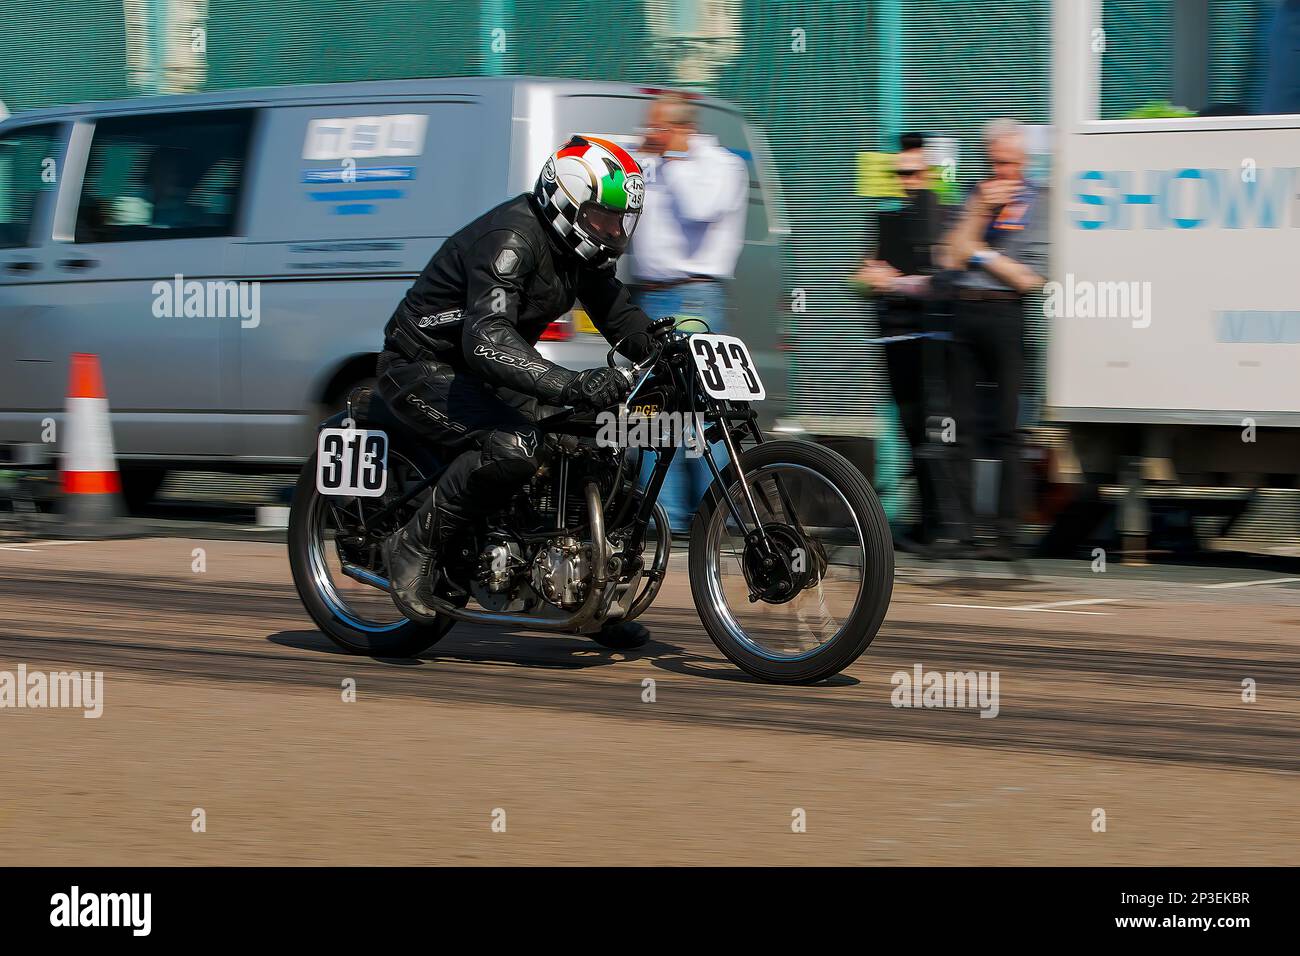 Richard Morgan riding a Rudge Sprinter at The Brighton National Speed Trials 2017. This is the oldest motor racing event in the UK and is held in the south east coastal town of Brighton. Madeira drive is a road which runs along the seafront and is normal full of people explorer the beach, pier and local attractions. Today it is turned in to a 1/4 time trial course. 2nd September 2017 Stock Photo